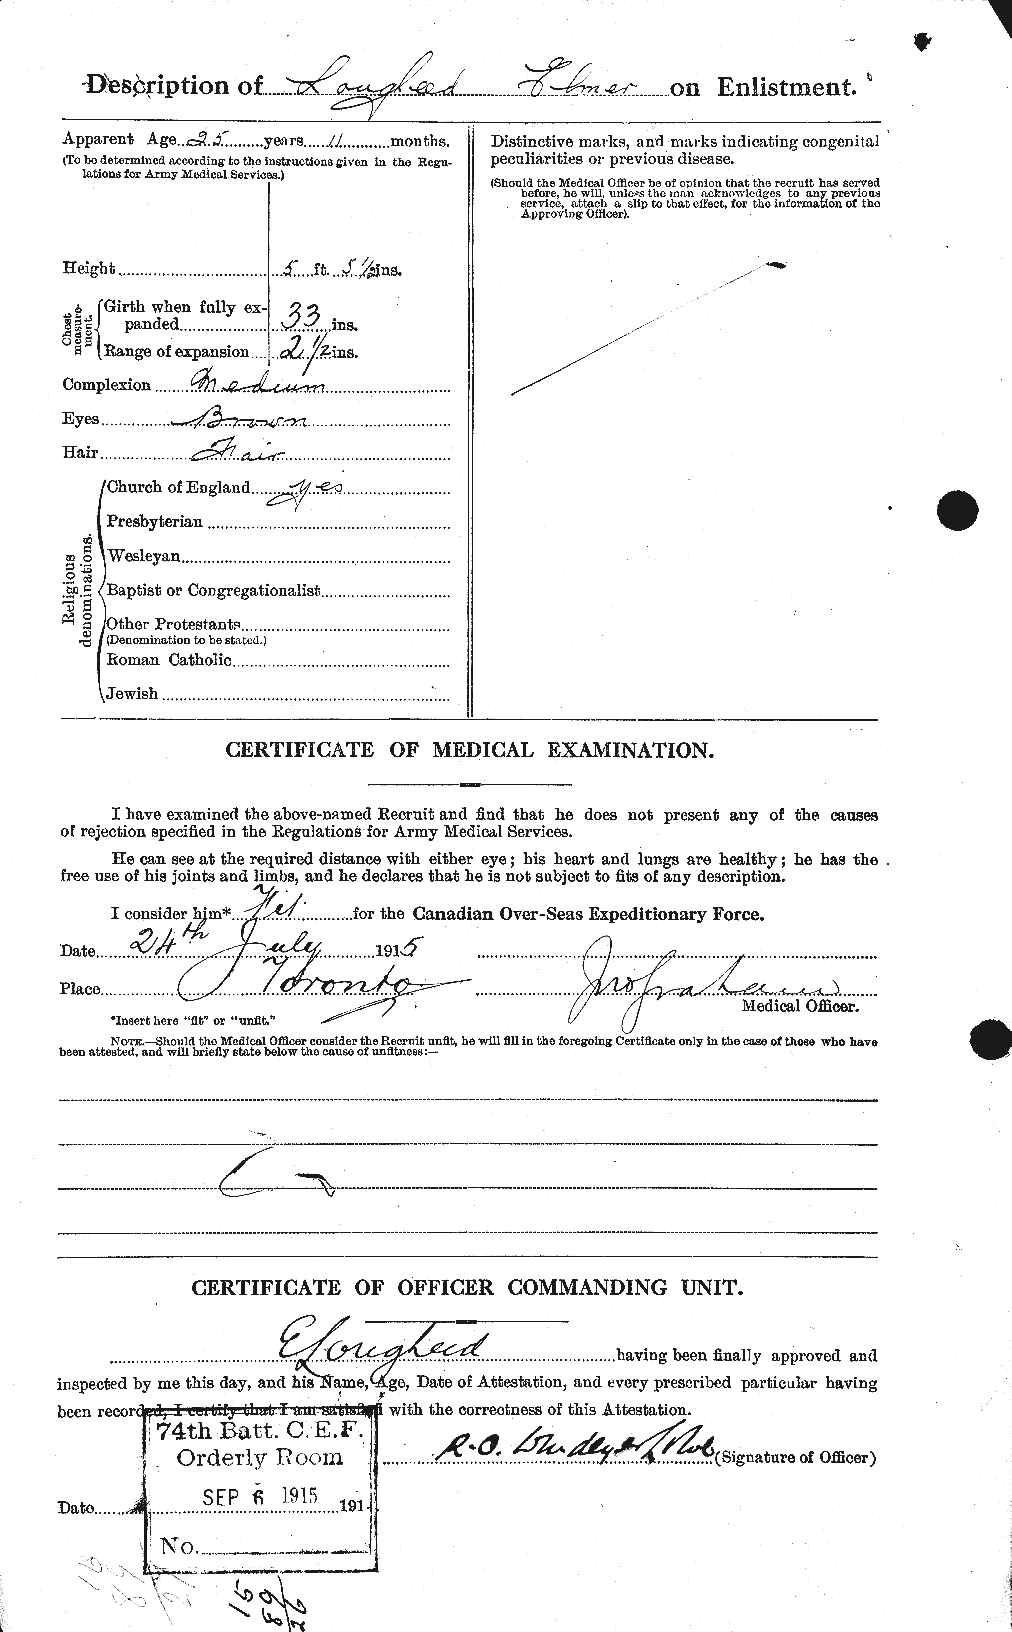 Personnel Records of the First World War - CEF 470393b